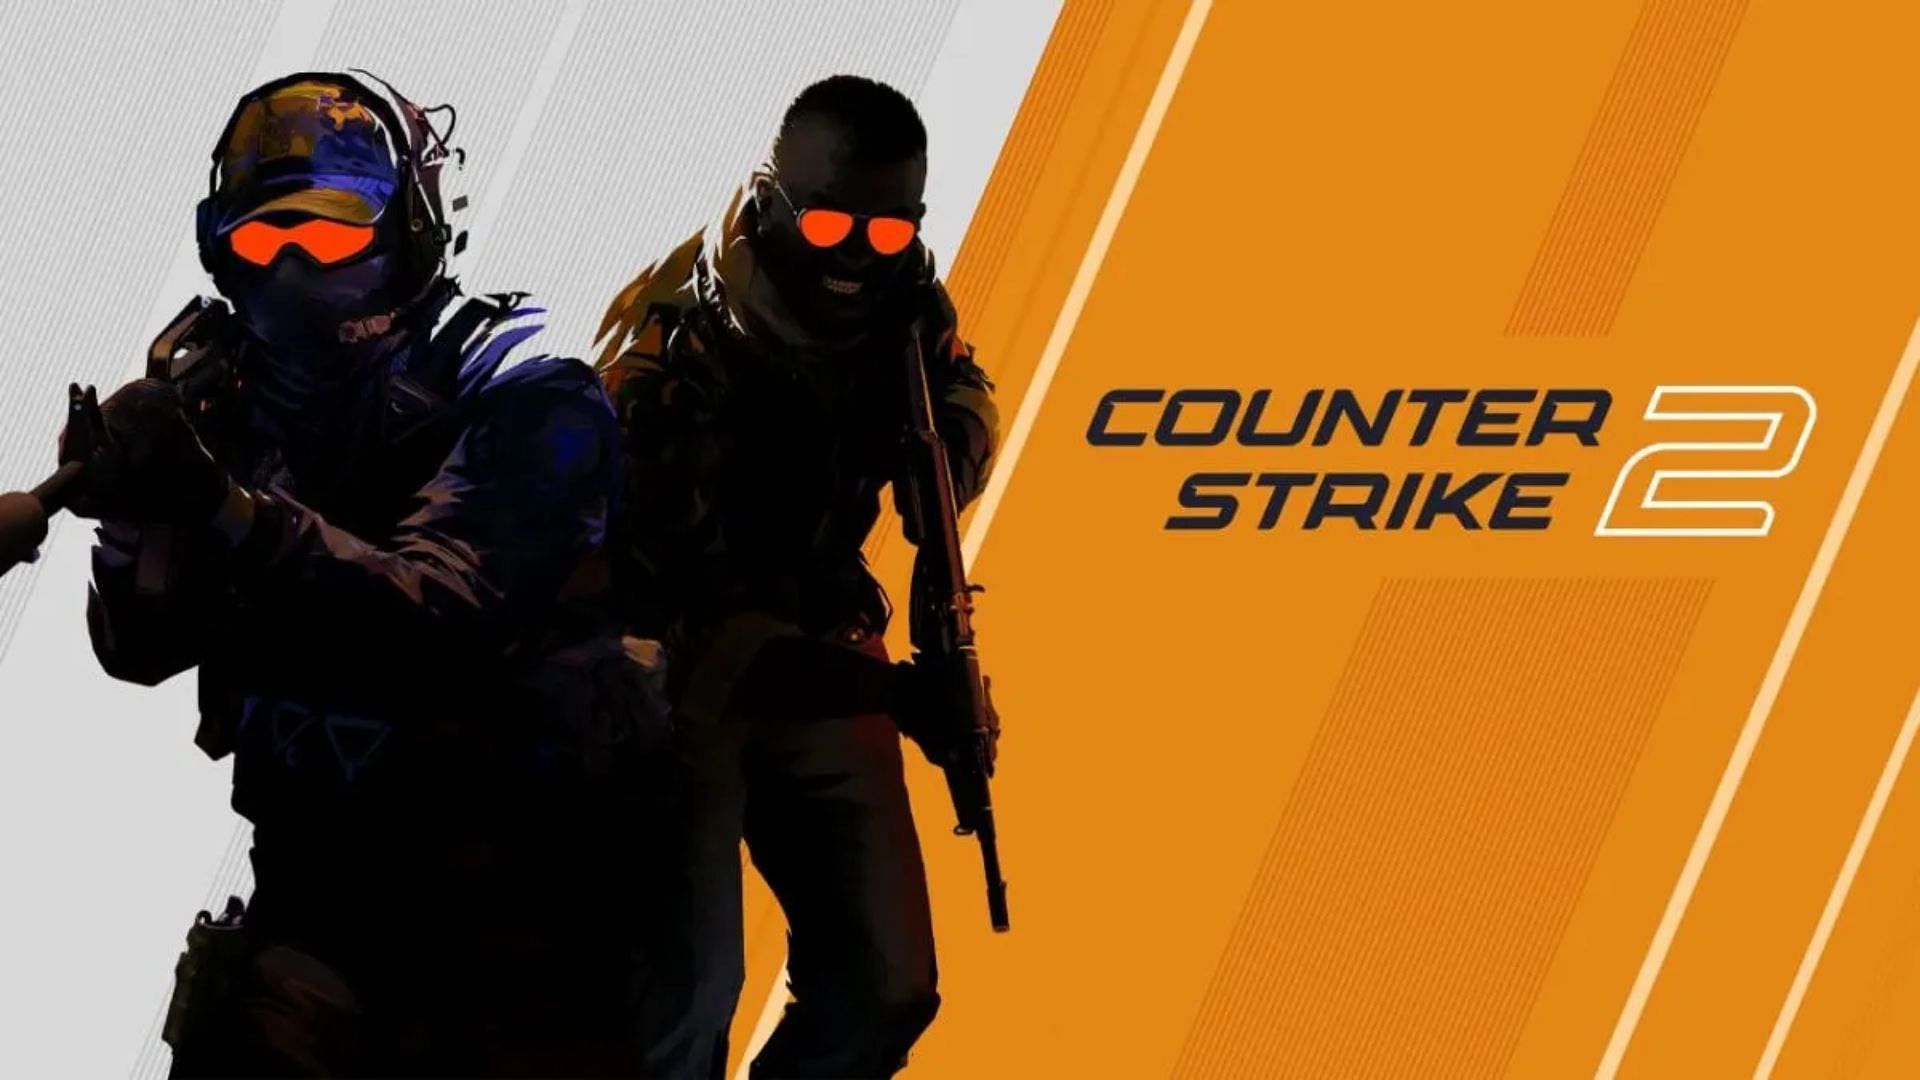 Counter-Strike 2 August 31 patch notes (Image via Valve)